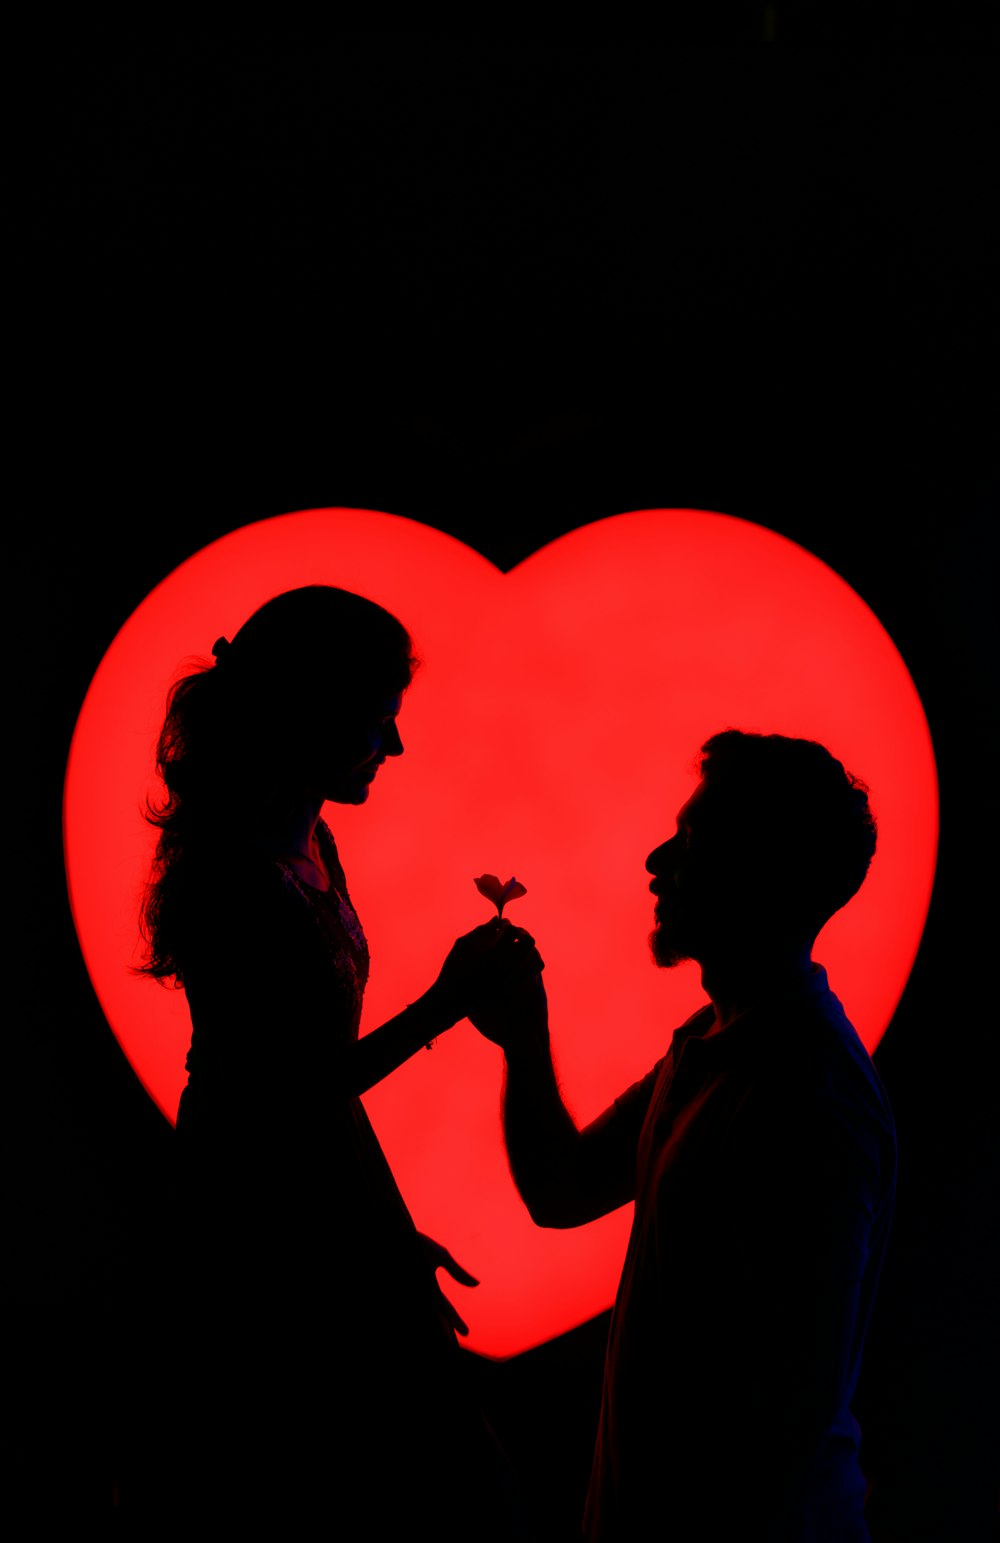 a man giving a woman a flower in front of a heart